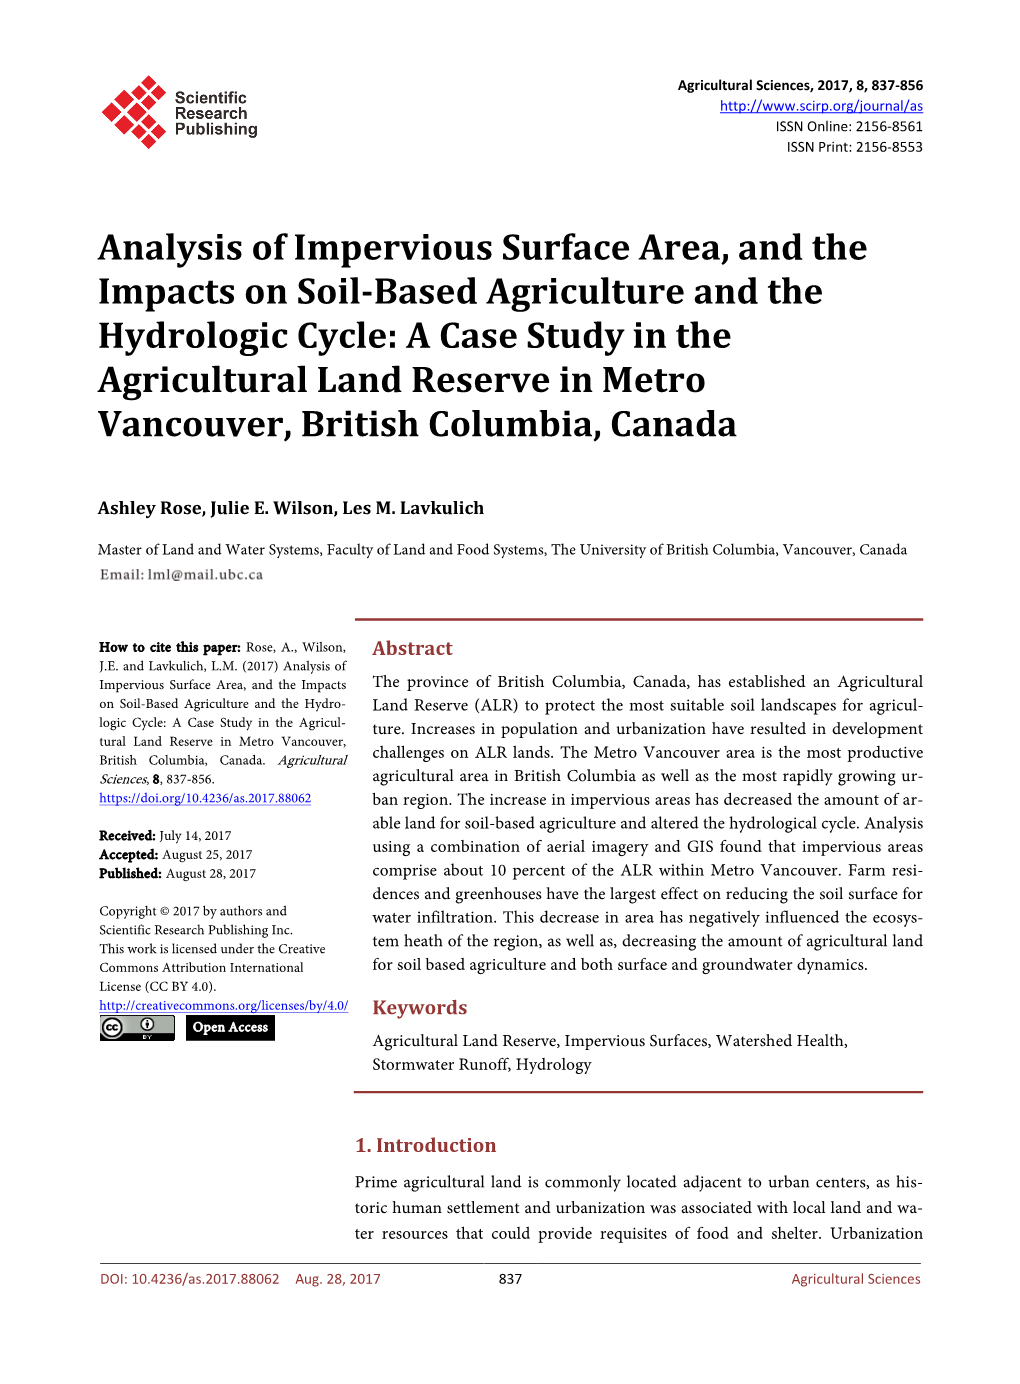 Analysis of Impervious Surface Area, and the Impacts on Soil-Based Agriculture and the Hydrologic Cycle: a Case Study in The